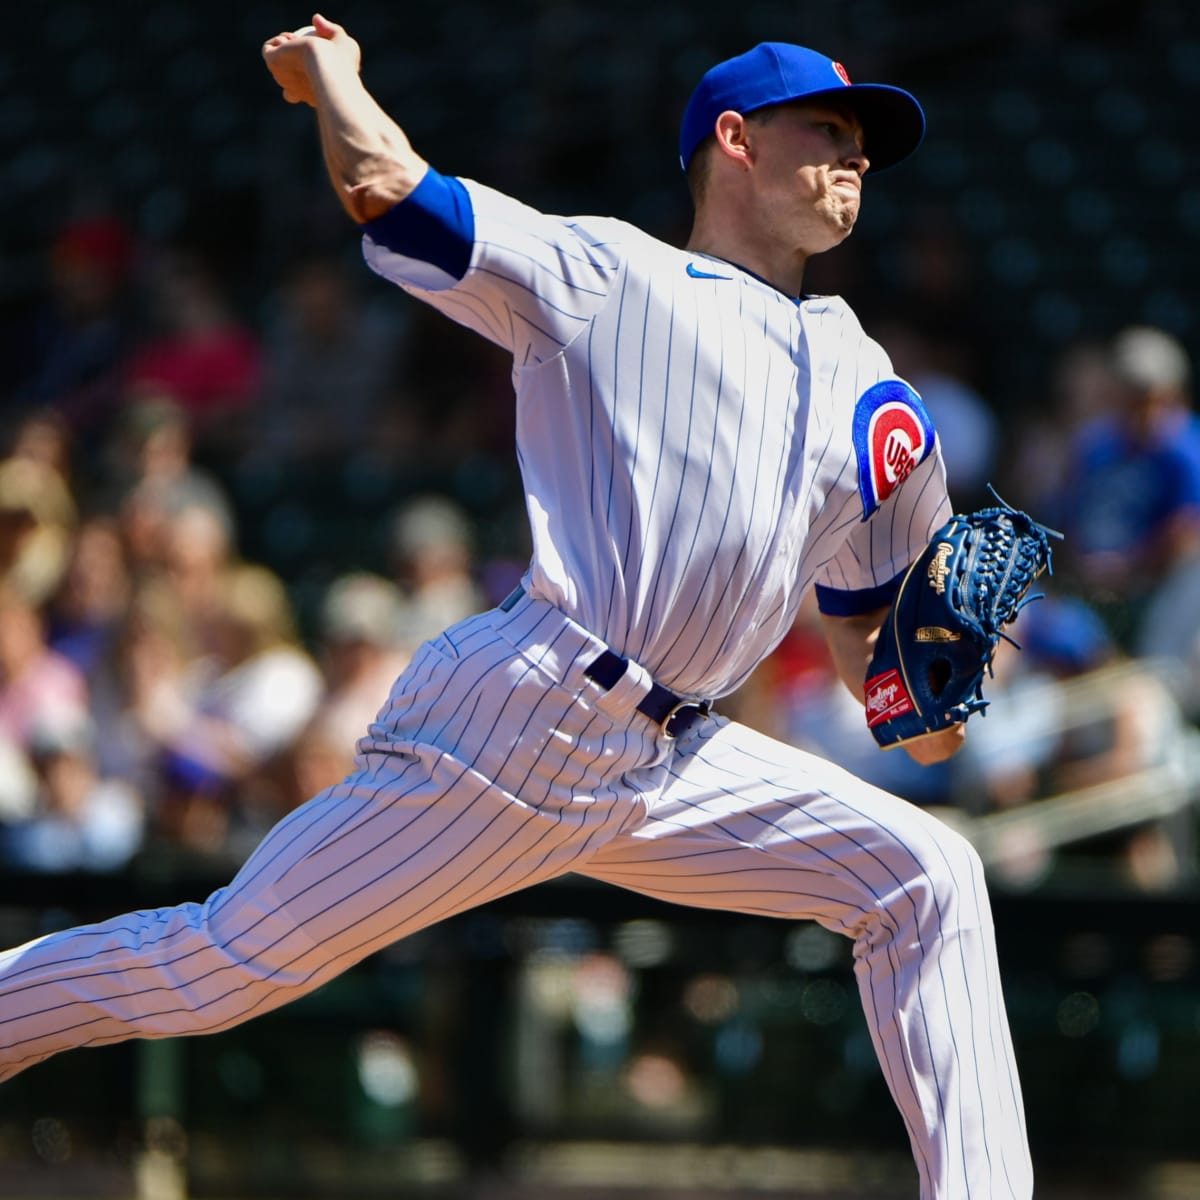 Thompson effective for Cubs despite losing control sometimes